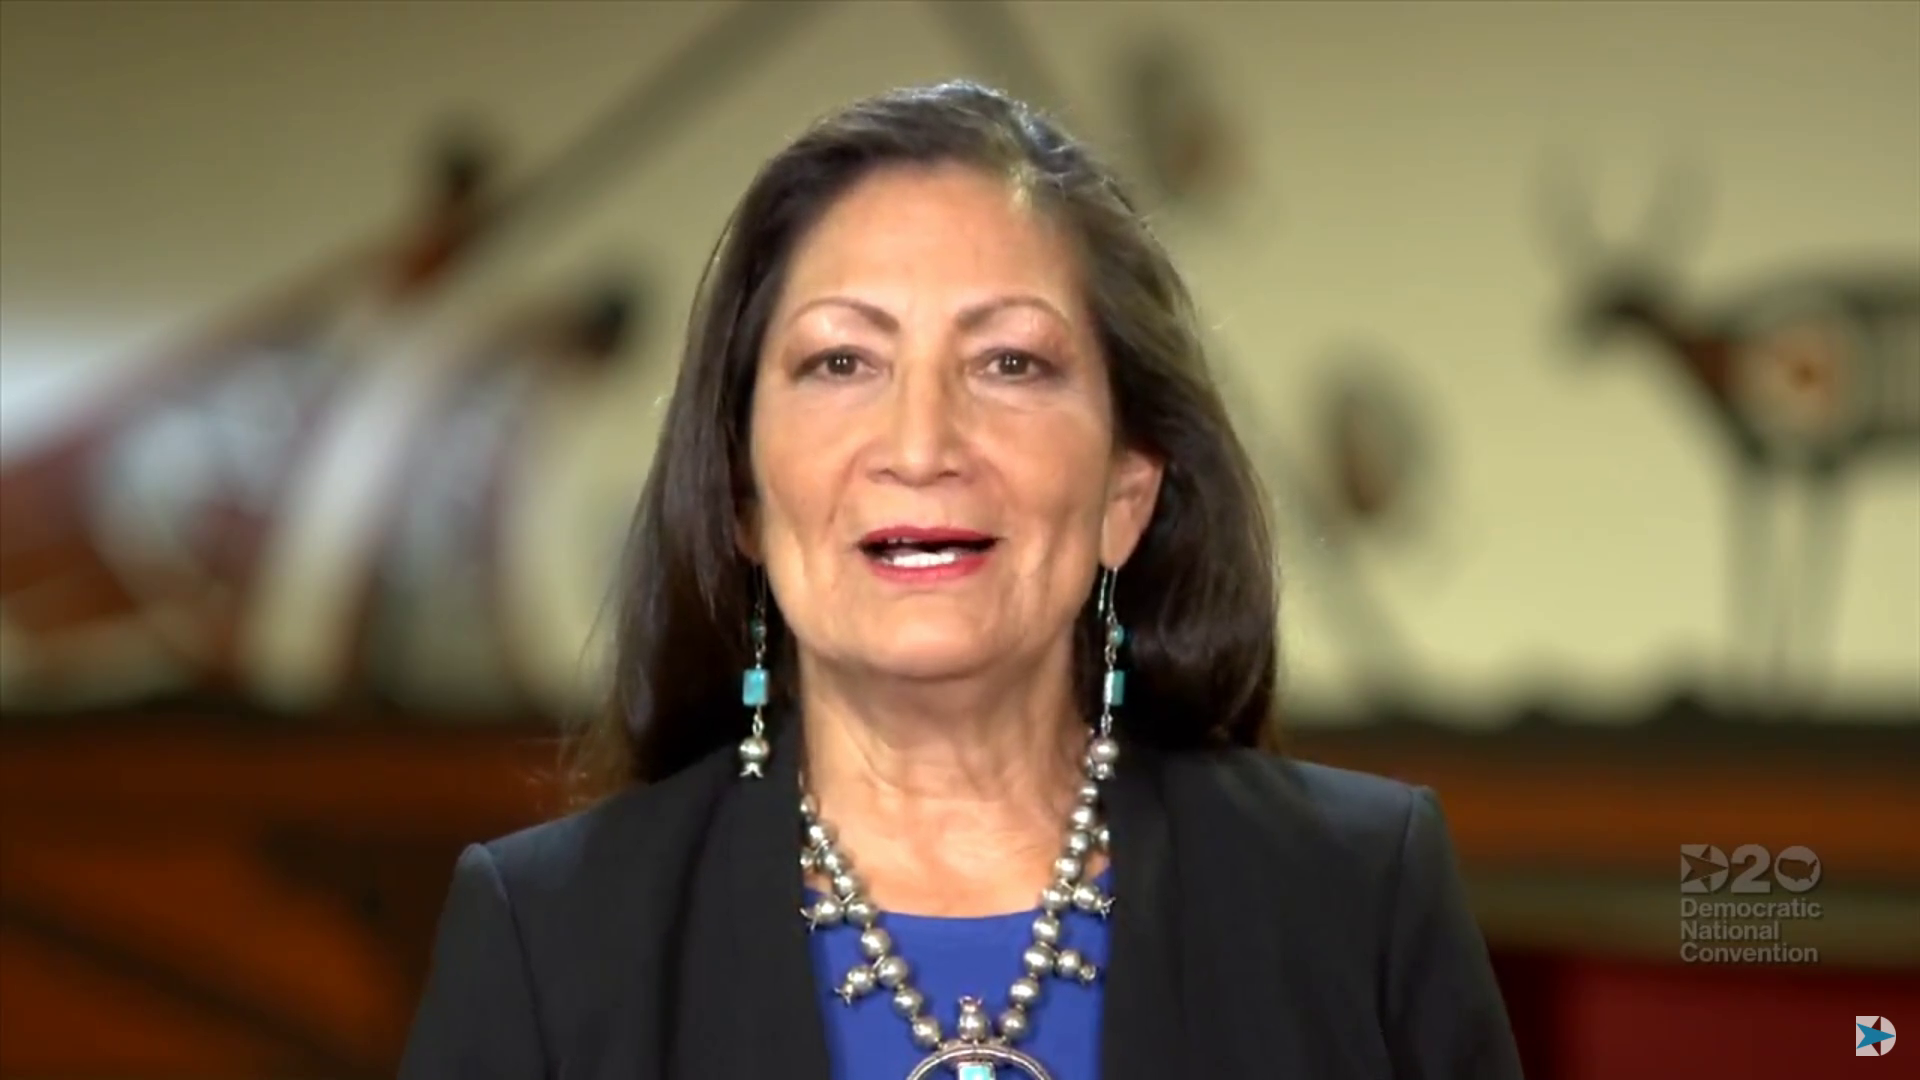 Haaland speaks at DNC about tribal history, encourages ‘sacred’ right of voting